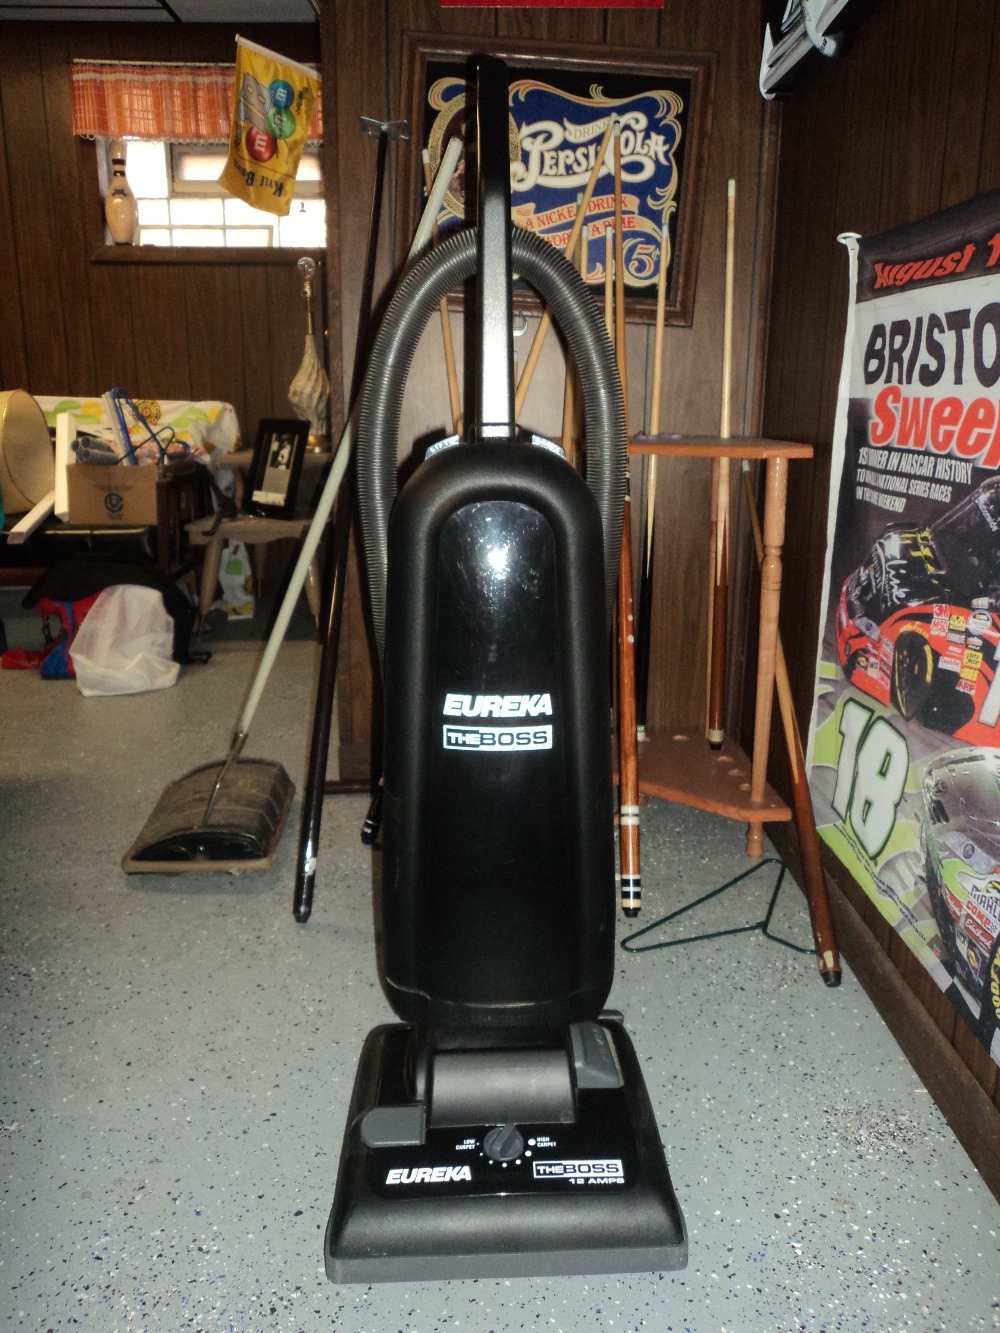 The vacuums